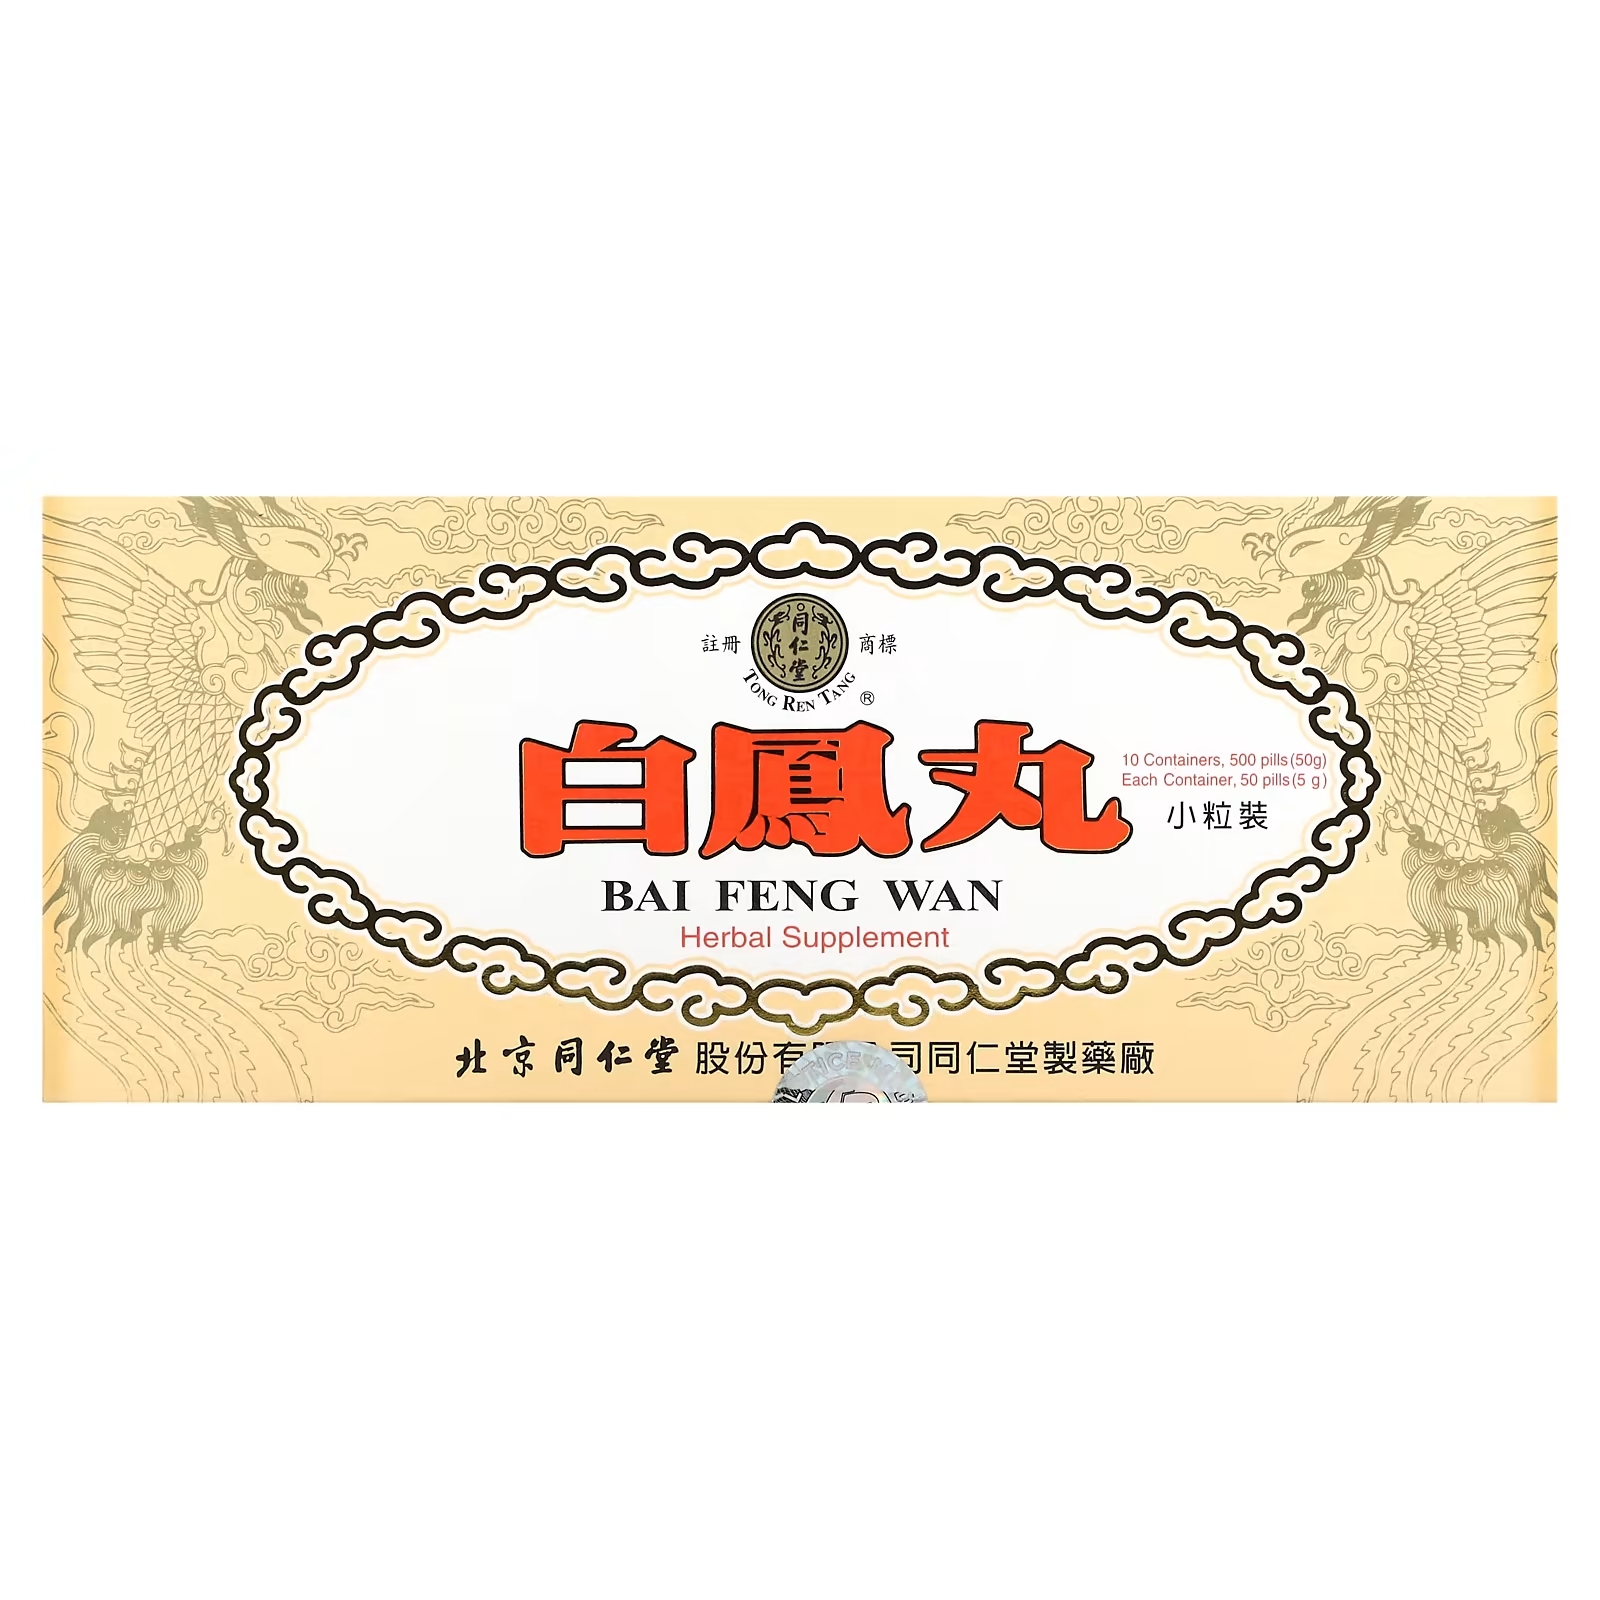 Tong Ren Tang Bai Feng Wan Supports the Health of the Body and Helps Maintain Energy Levels 10 Containers, 500шт